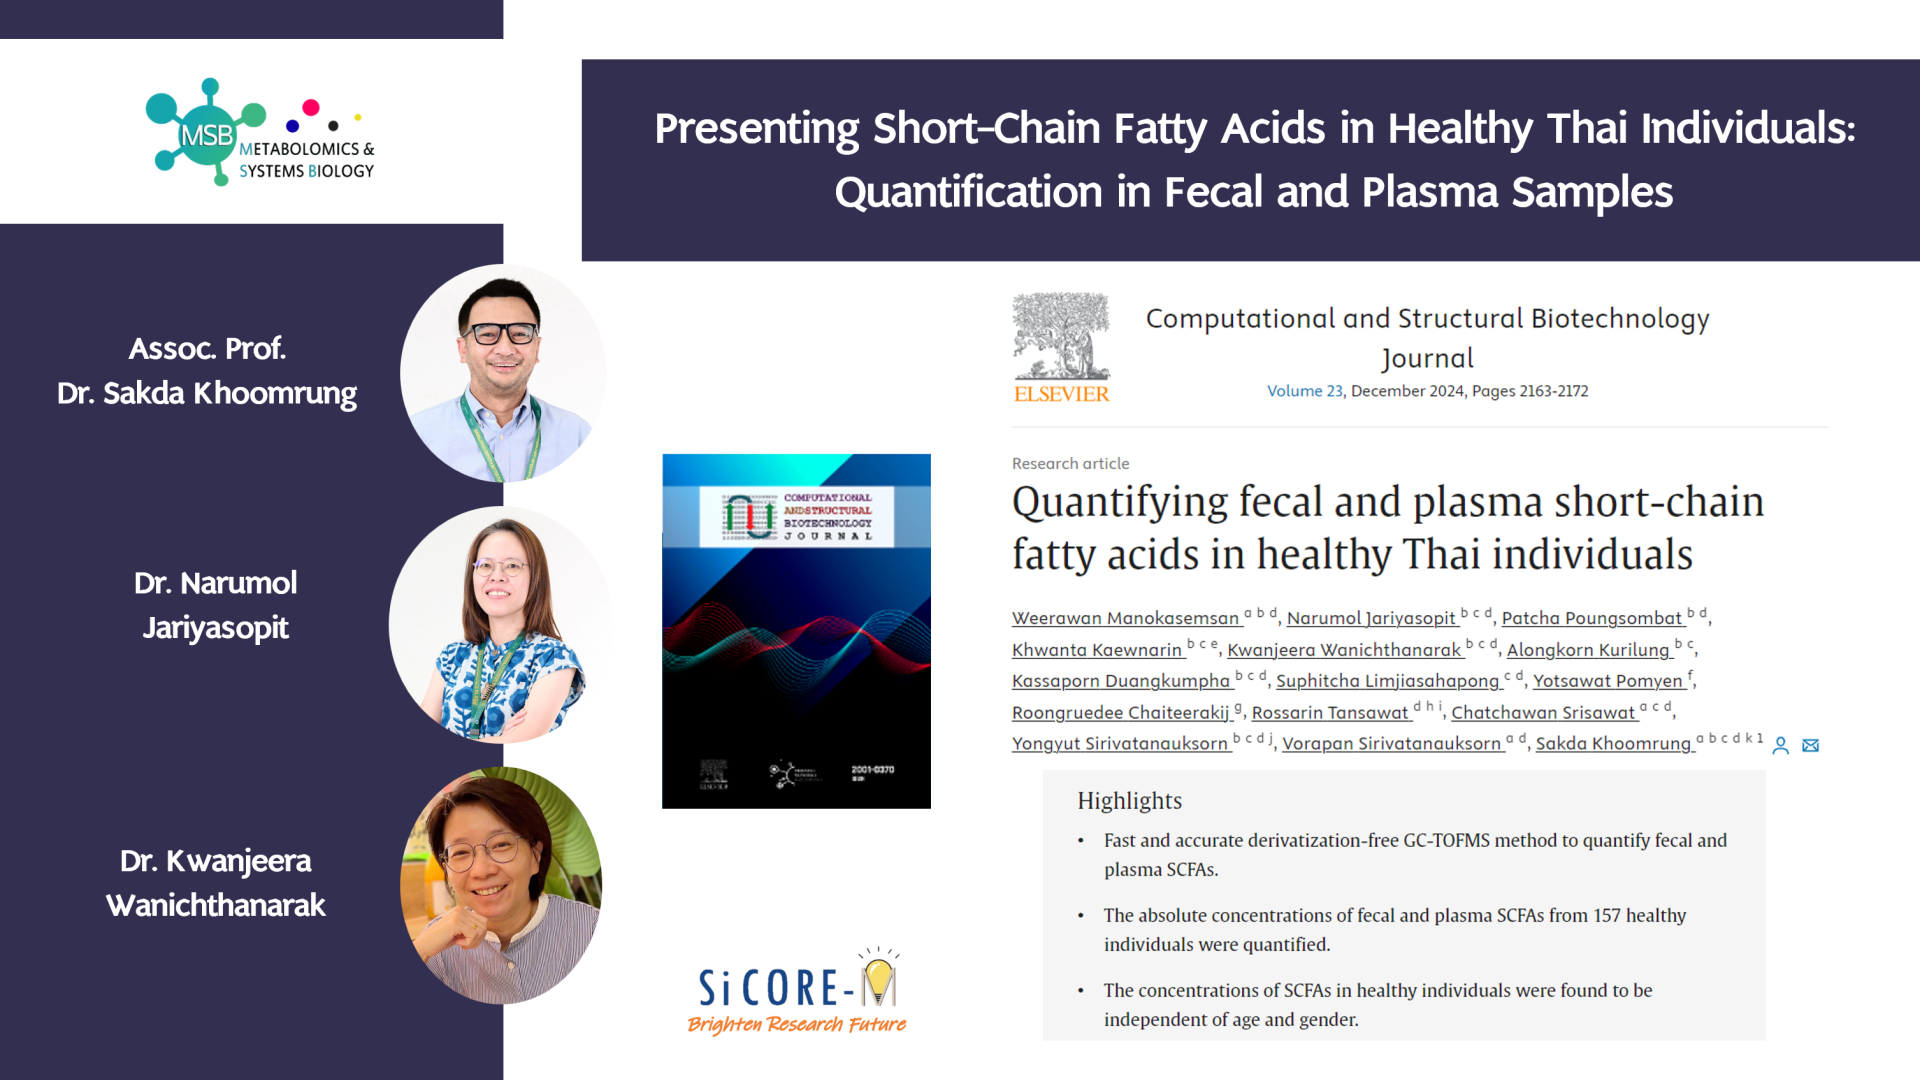 Presenting Short-Chain Fatty Acids in Healthy Thai Individuals: Quantification in Fecal and Plasma Samples